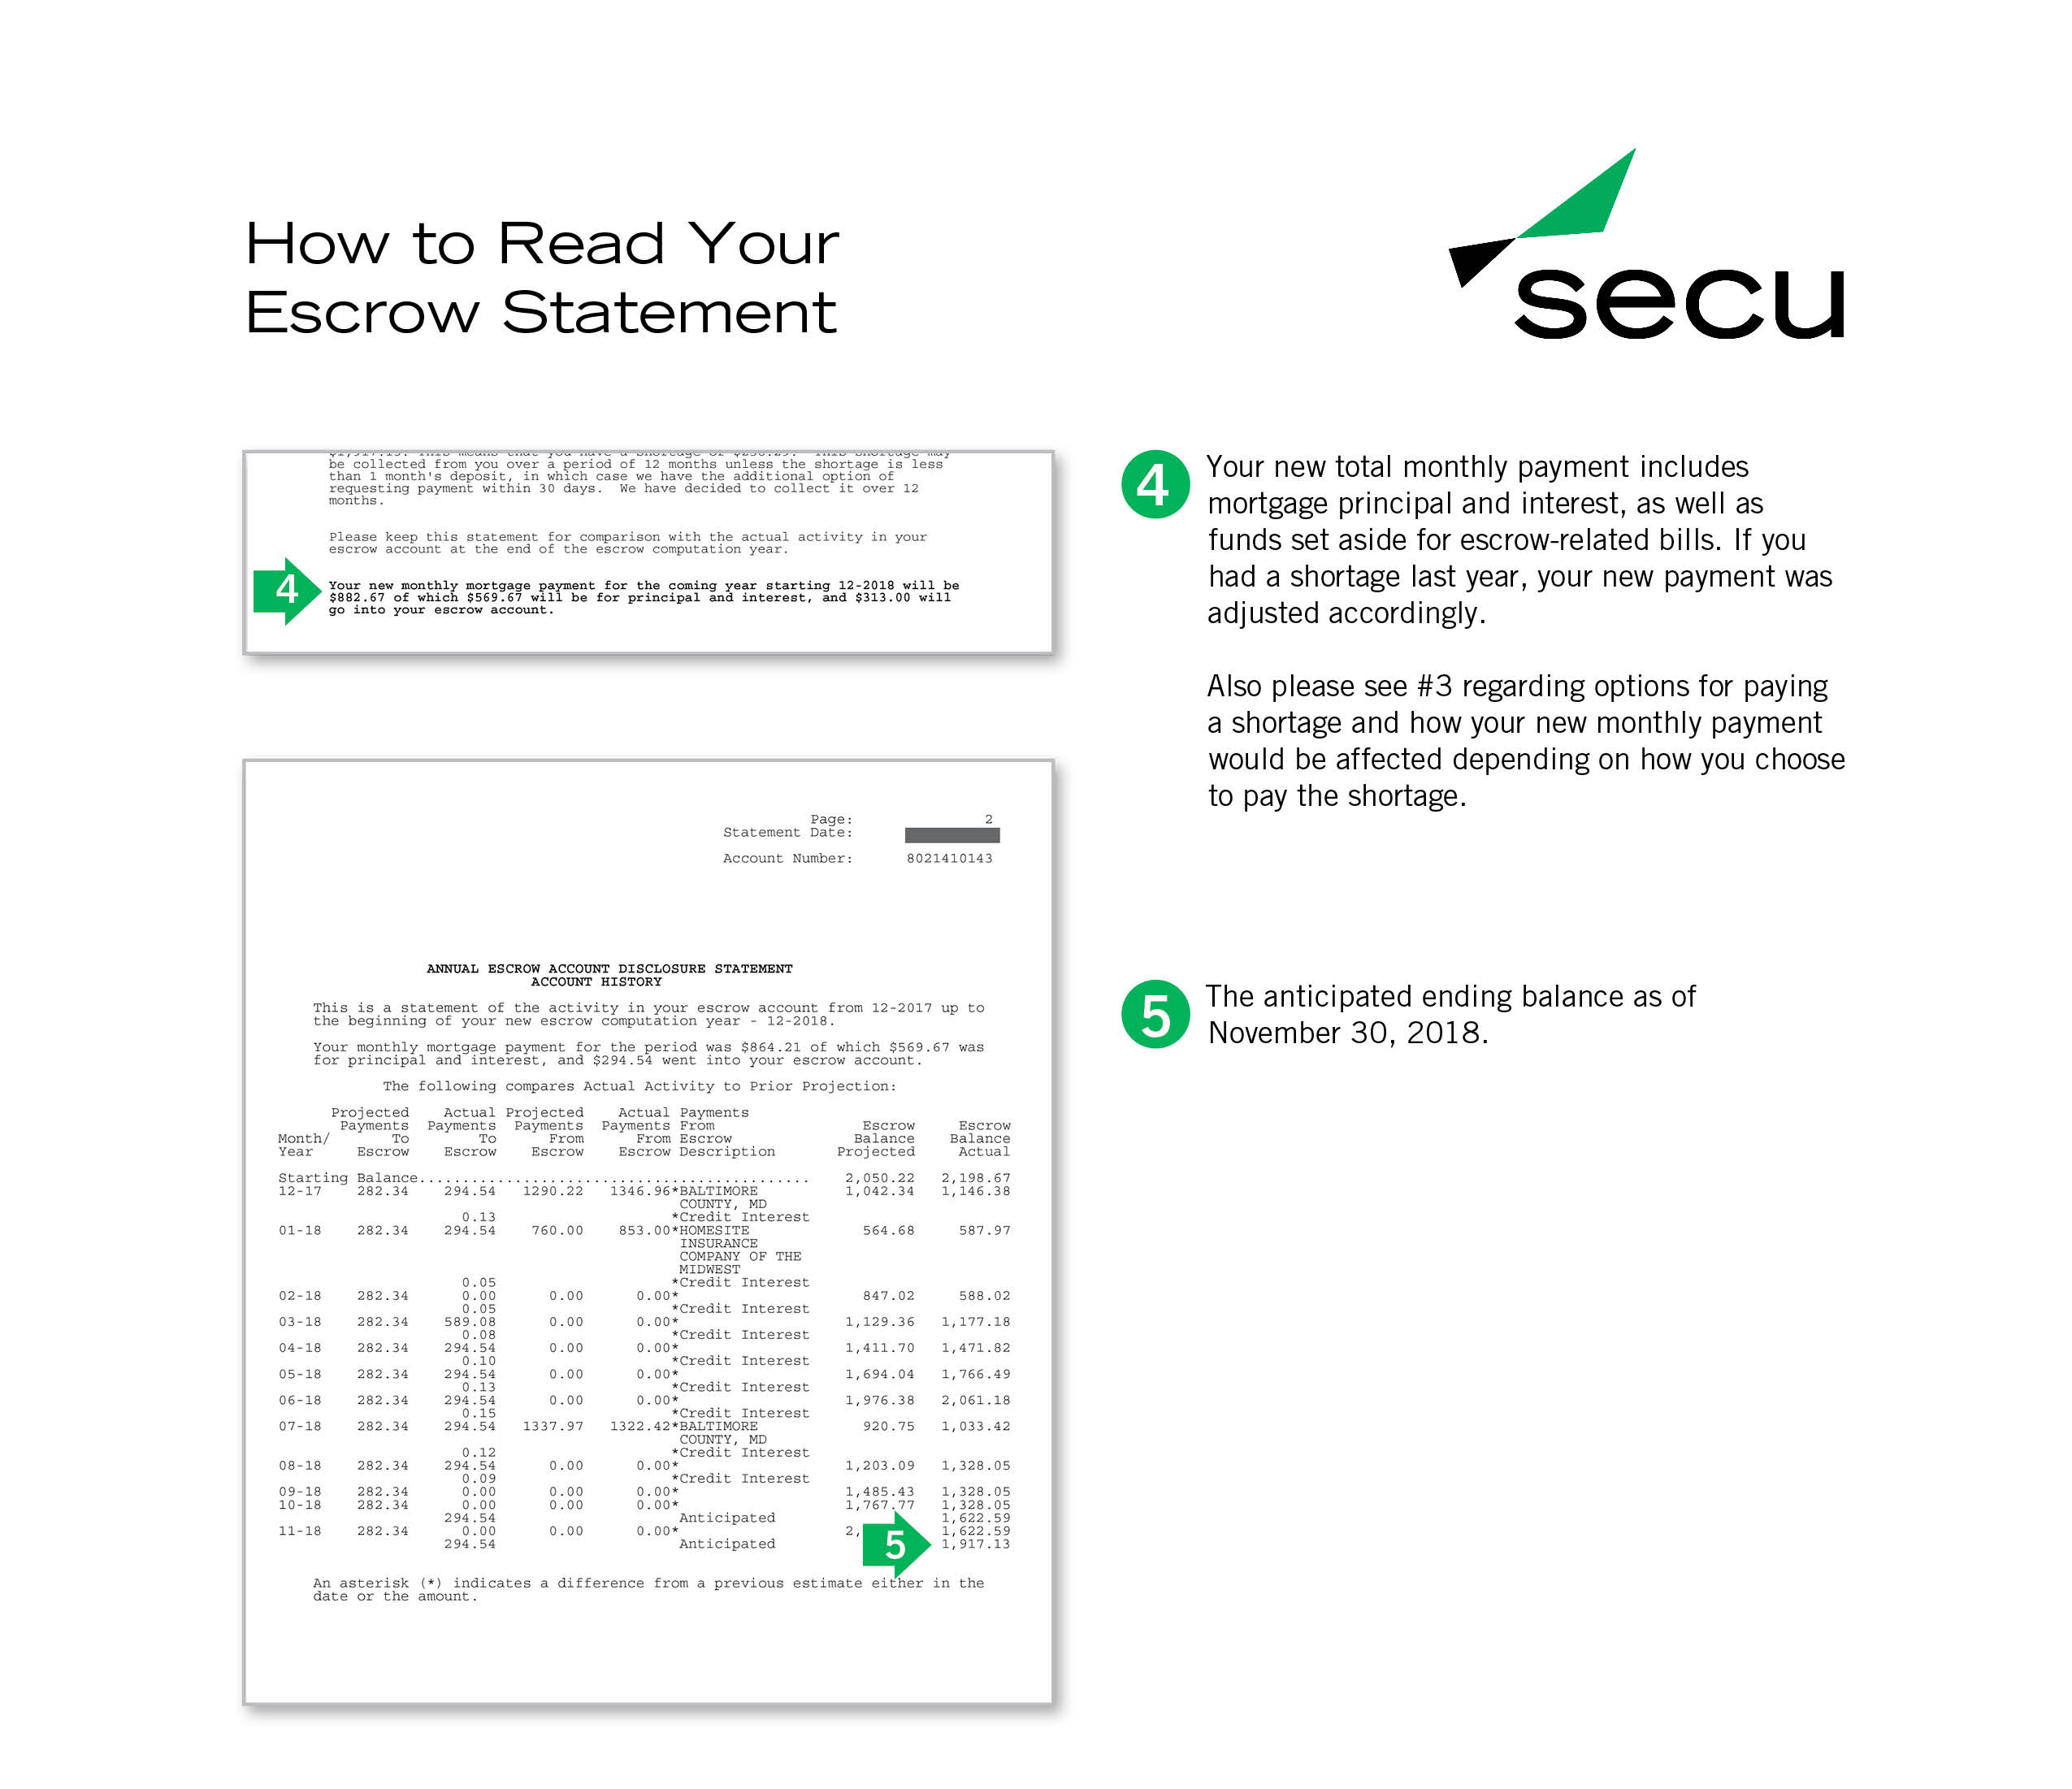 How to read your escrow statement, page 2